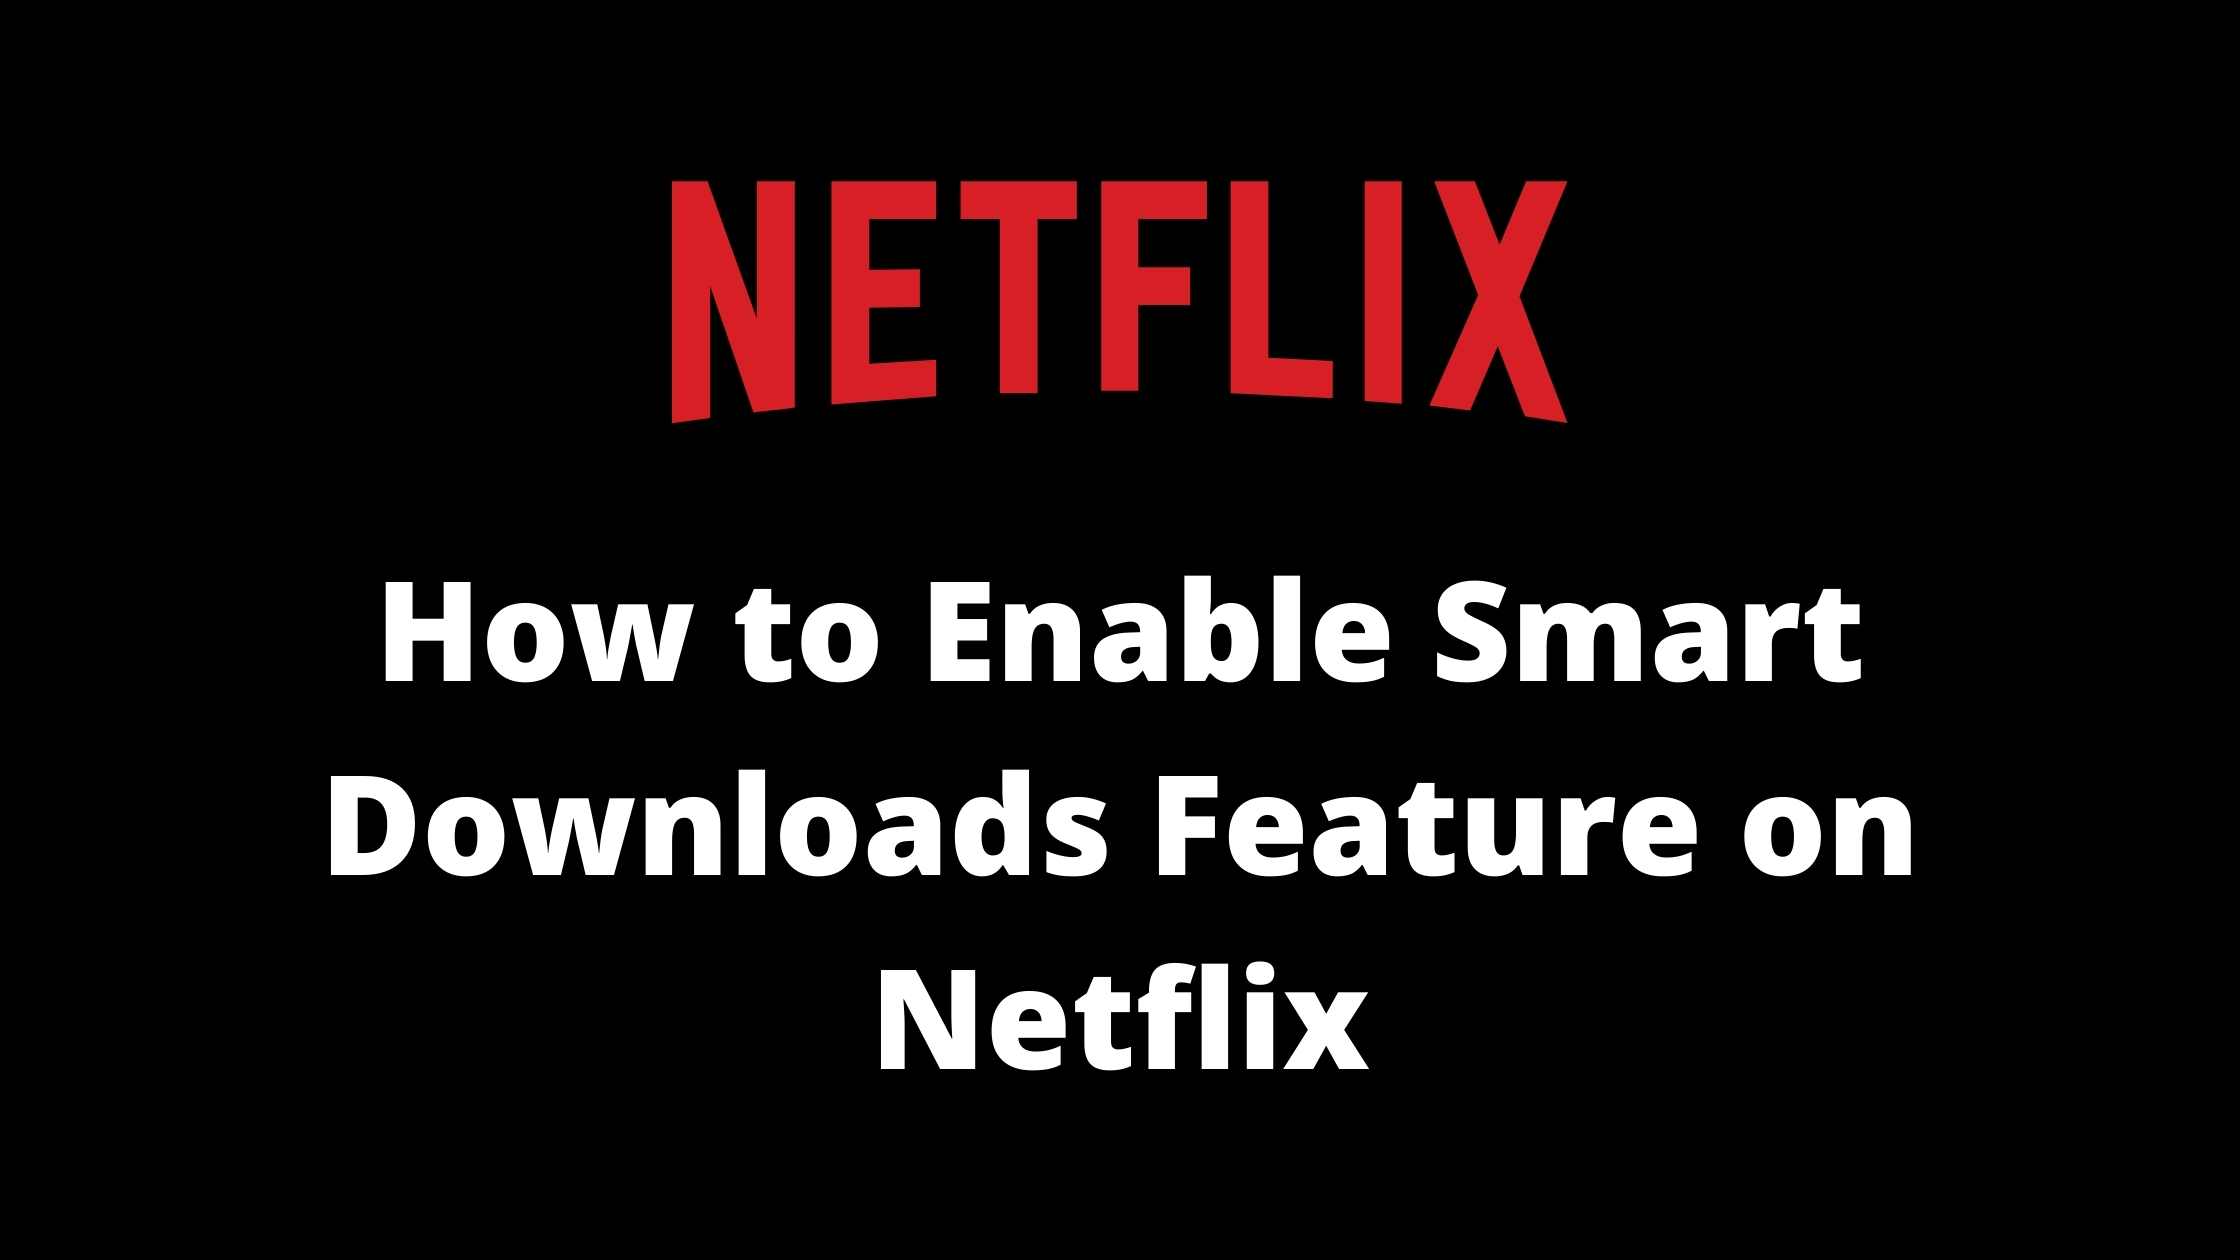 how to enable smart downloads on Netflix